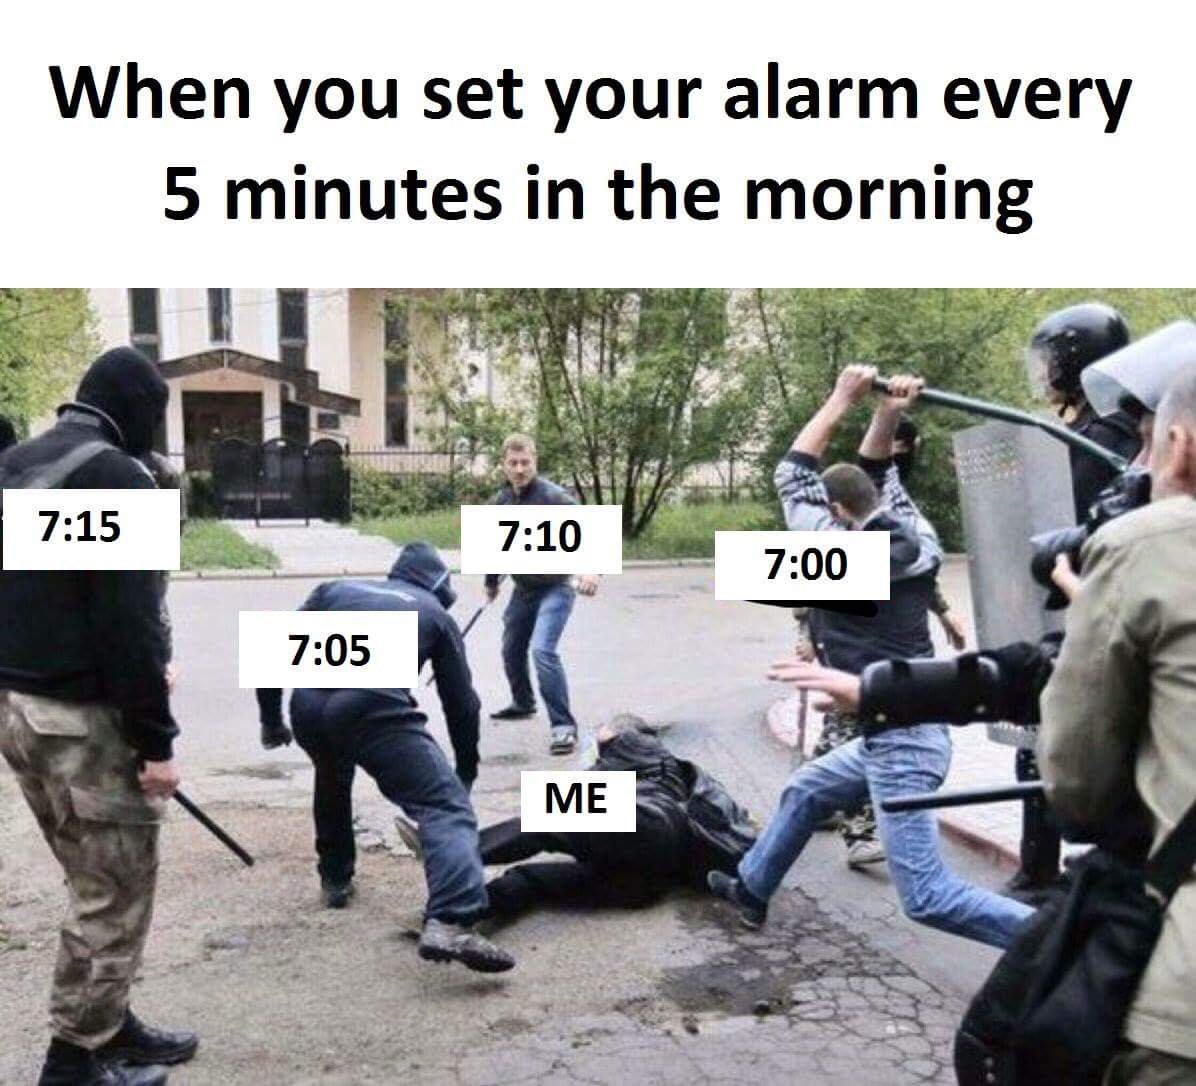 you set your alarm every 5 minutes - When you set your alarm every 5 minutes in the morning 1 7 10 Me